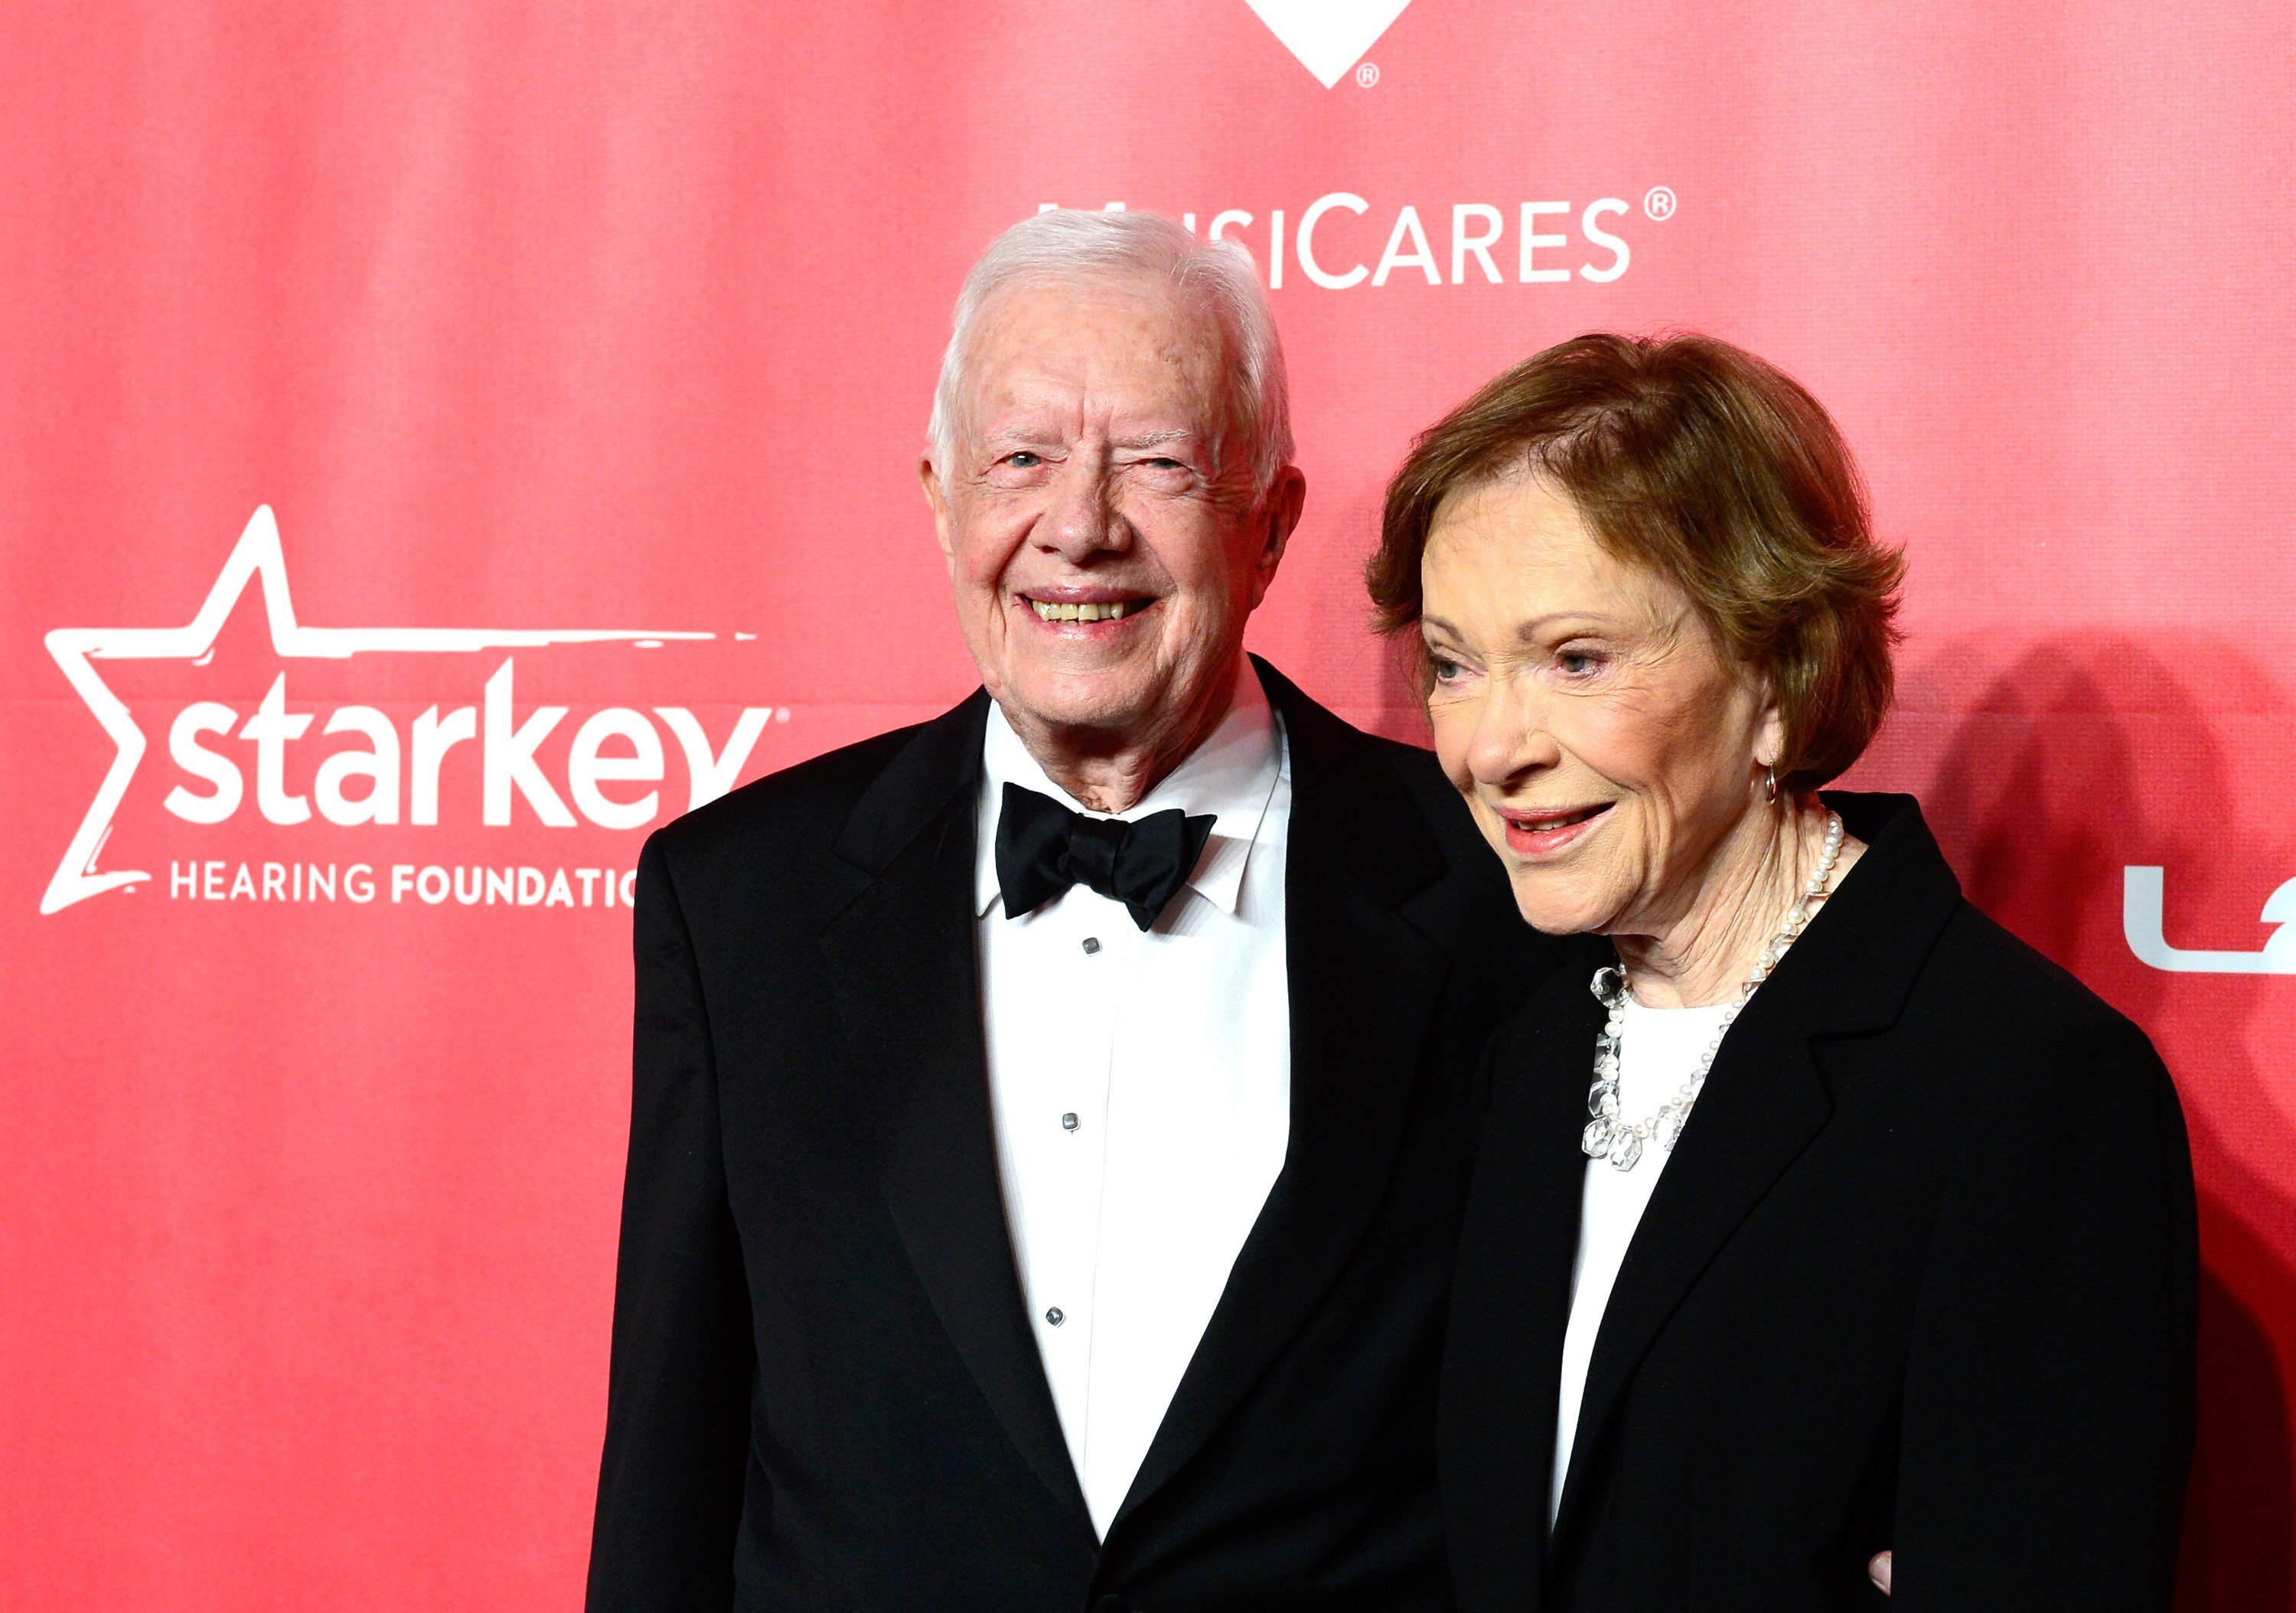 Jimmy Carter (L) and former First Lady Rosalynn Carter attend the 25th anniversary MusiCares 2015 Person Of The Year Gala on February 6, 2015, in Los Angeles, California. | Source: Getty Images.